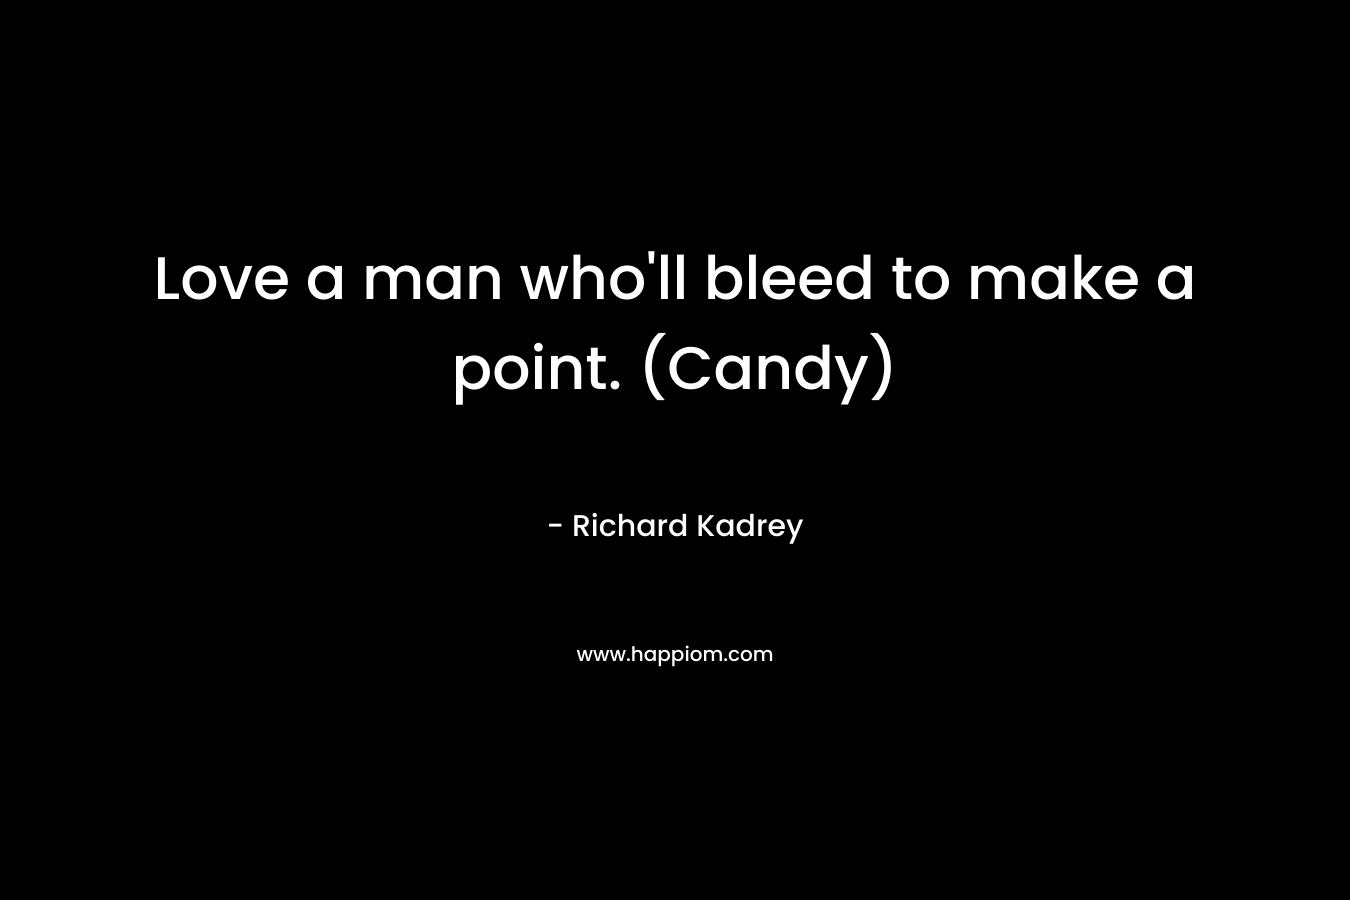 Love a man who'll bleed to make a point. (Candy)